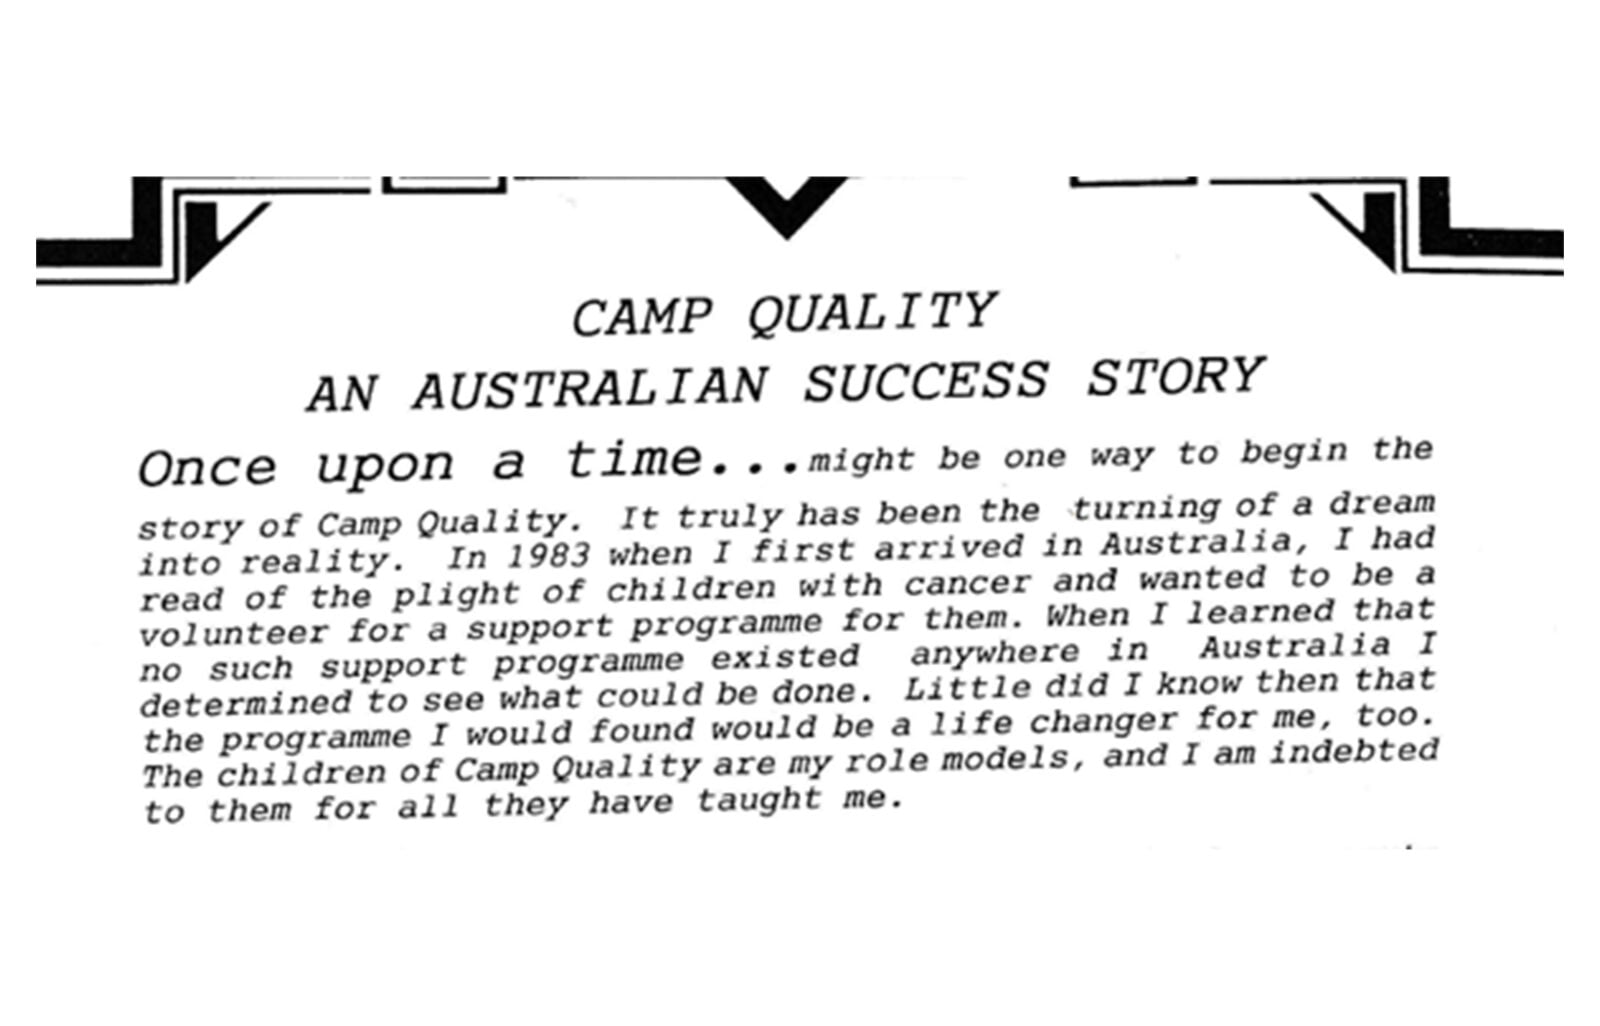 A newspaper clipping about Camp Quality starting in 1983